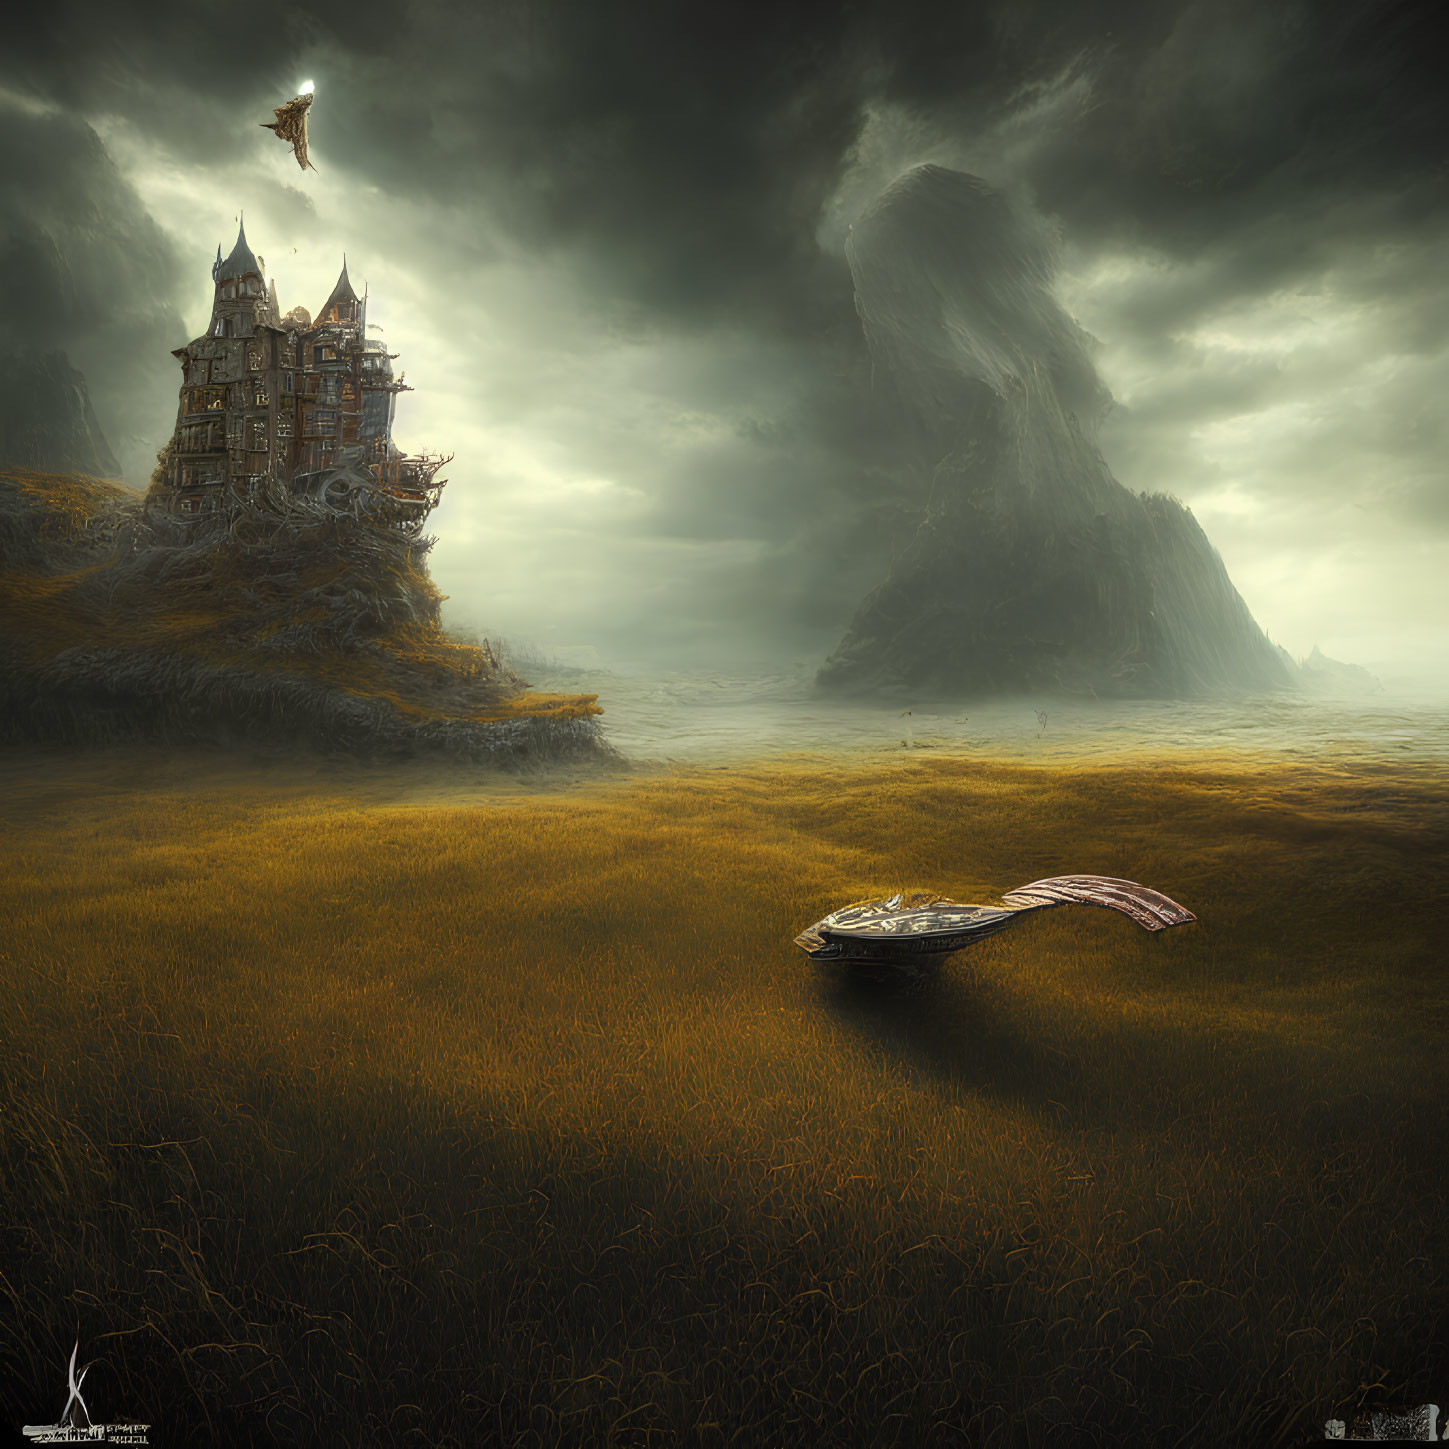 Abandoned boat in grassy field near eerie castle and flying creature